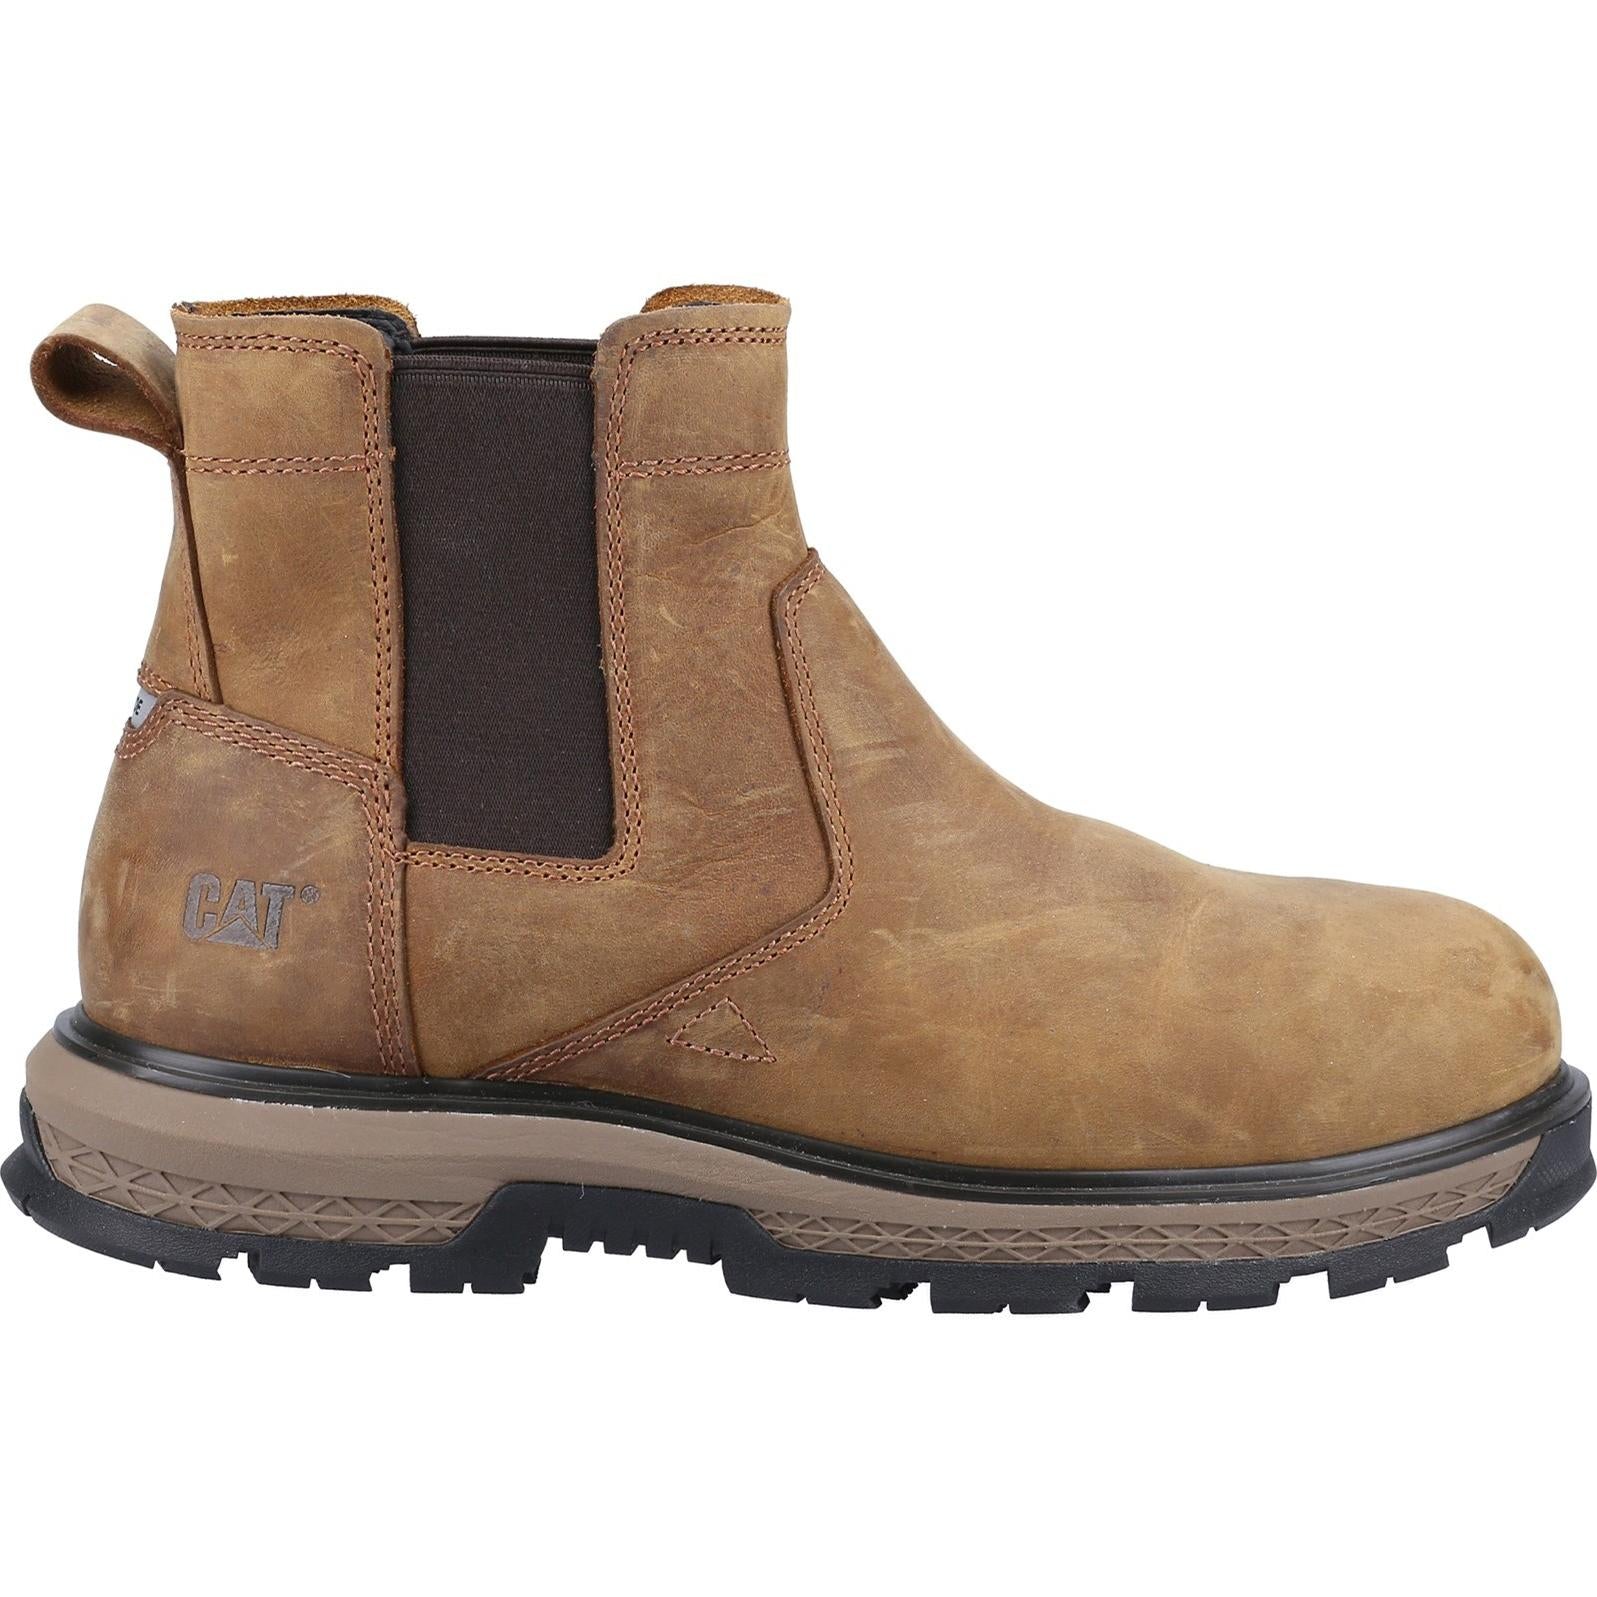 Cat Footwear Exposition Chelsea Safety Boot